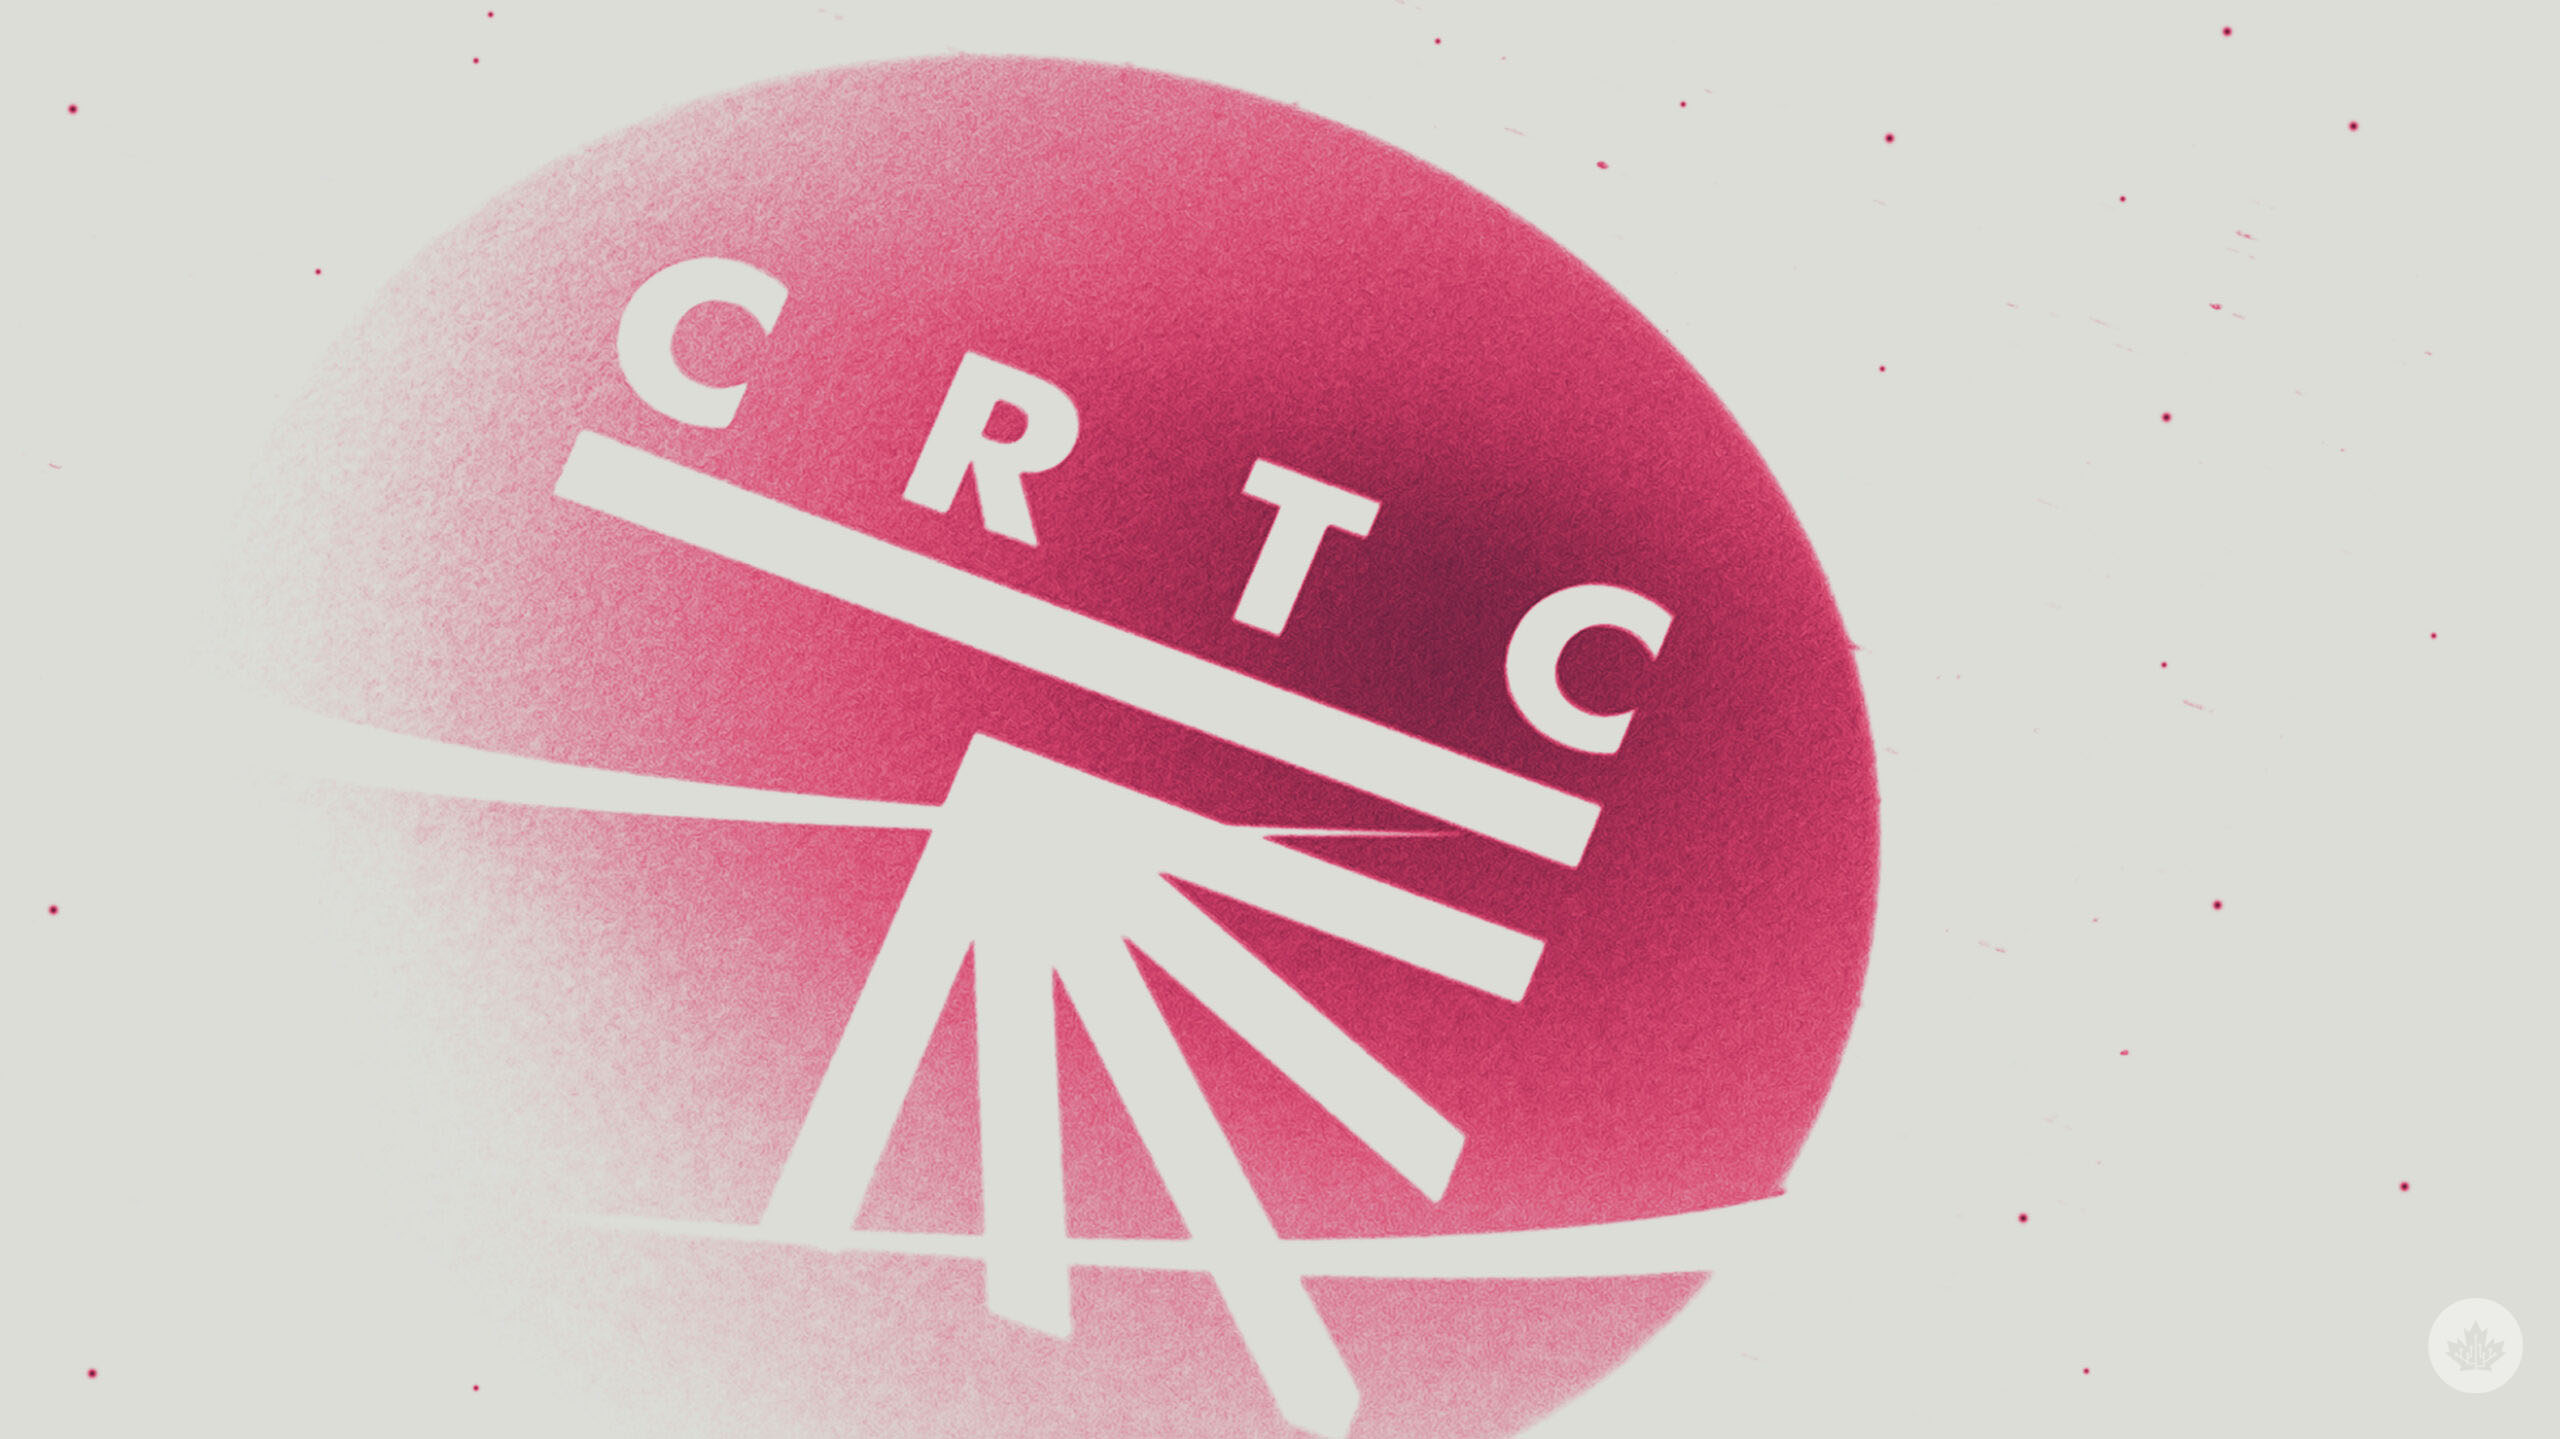 CRTC’s Broadband Fund to pay $20.5 million for 10 wireless and internet projects